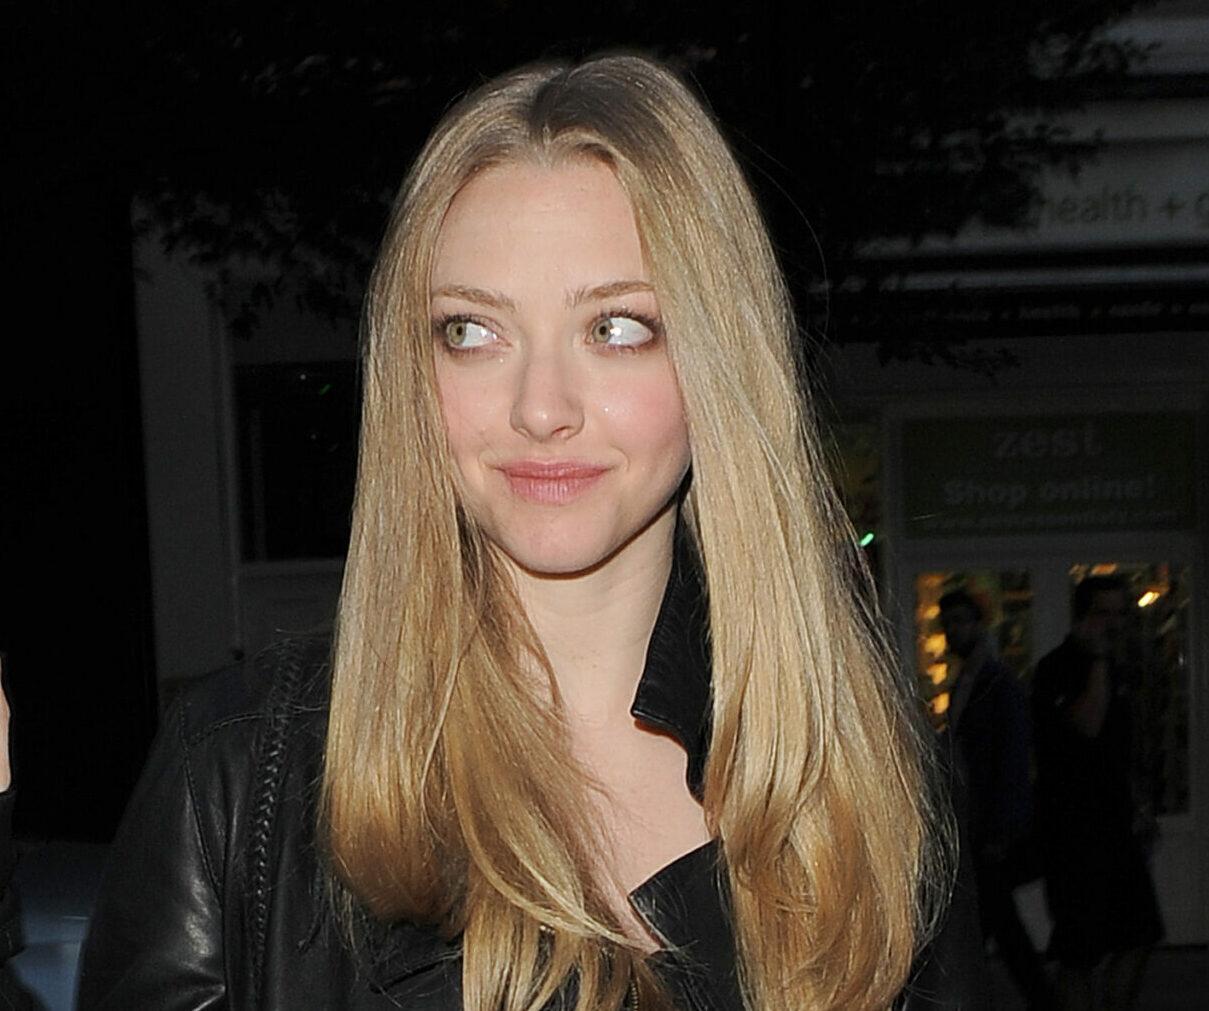 Amanda Seyfried arriving at Yauatcha restaurant in Soho The actress wore a black leather jacket black t-shirt jeans and orange high heels